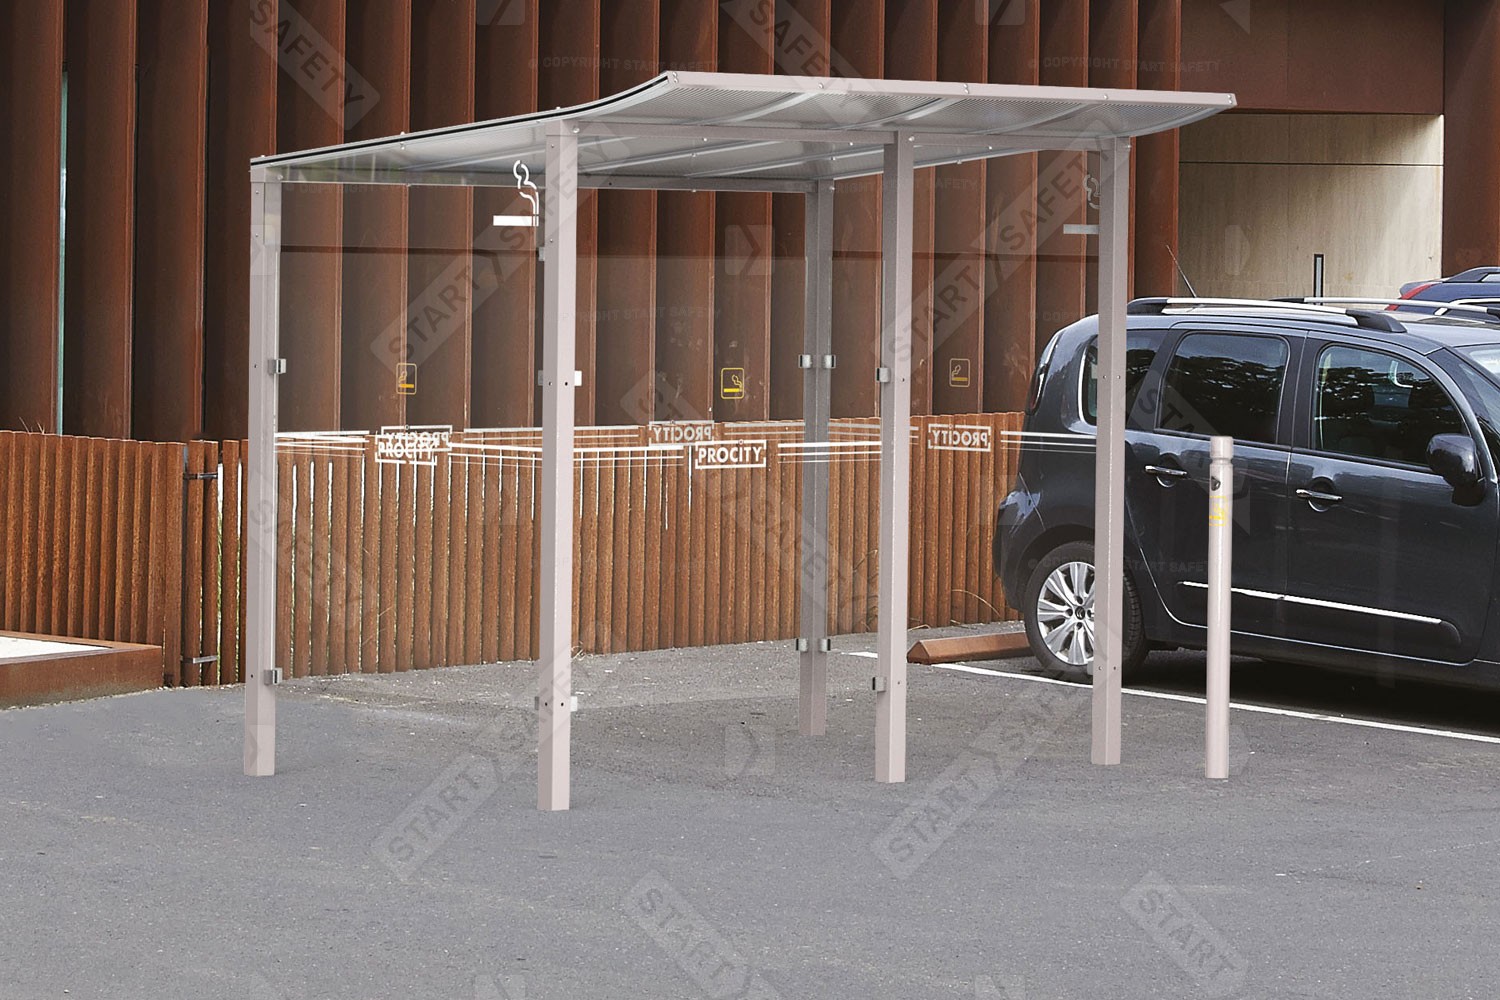 Procity Smoking Shelter Installed In Car Park